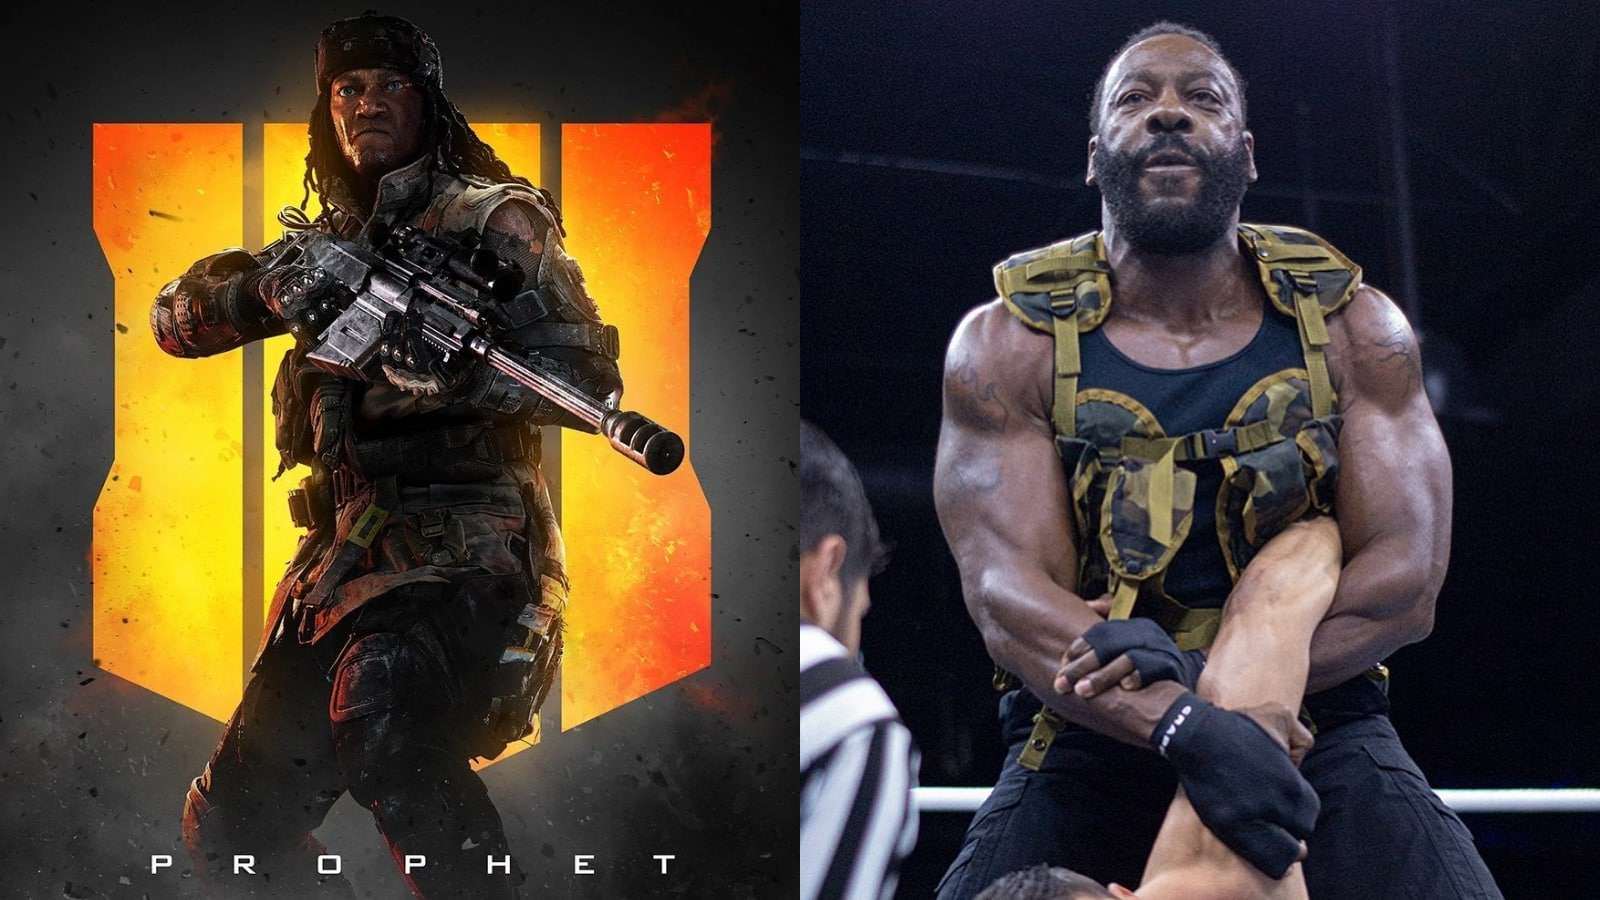 Prophet from COD side-by-side with booker t